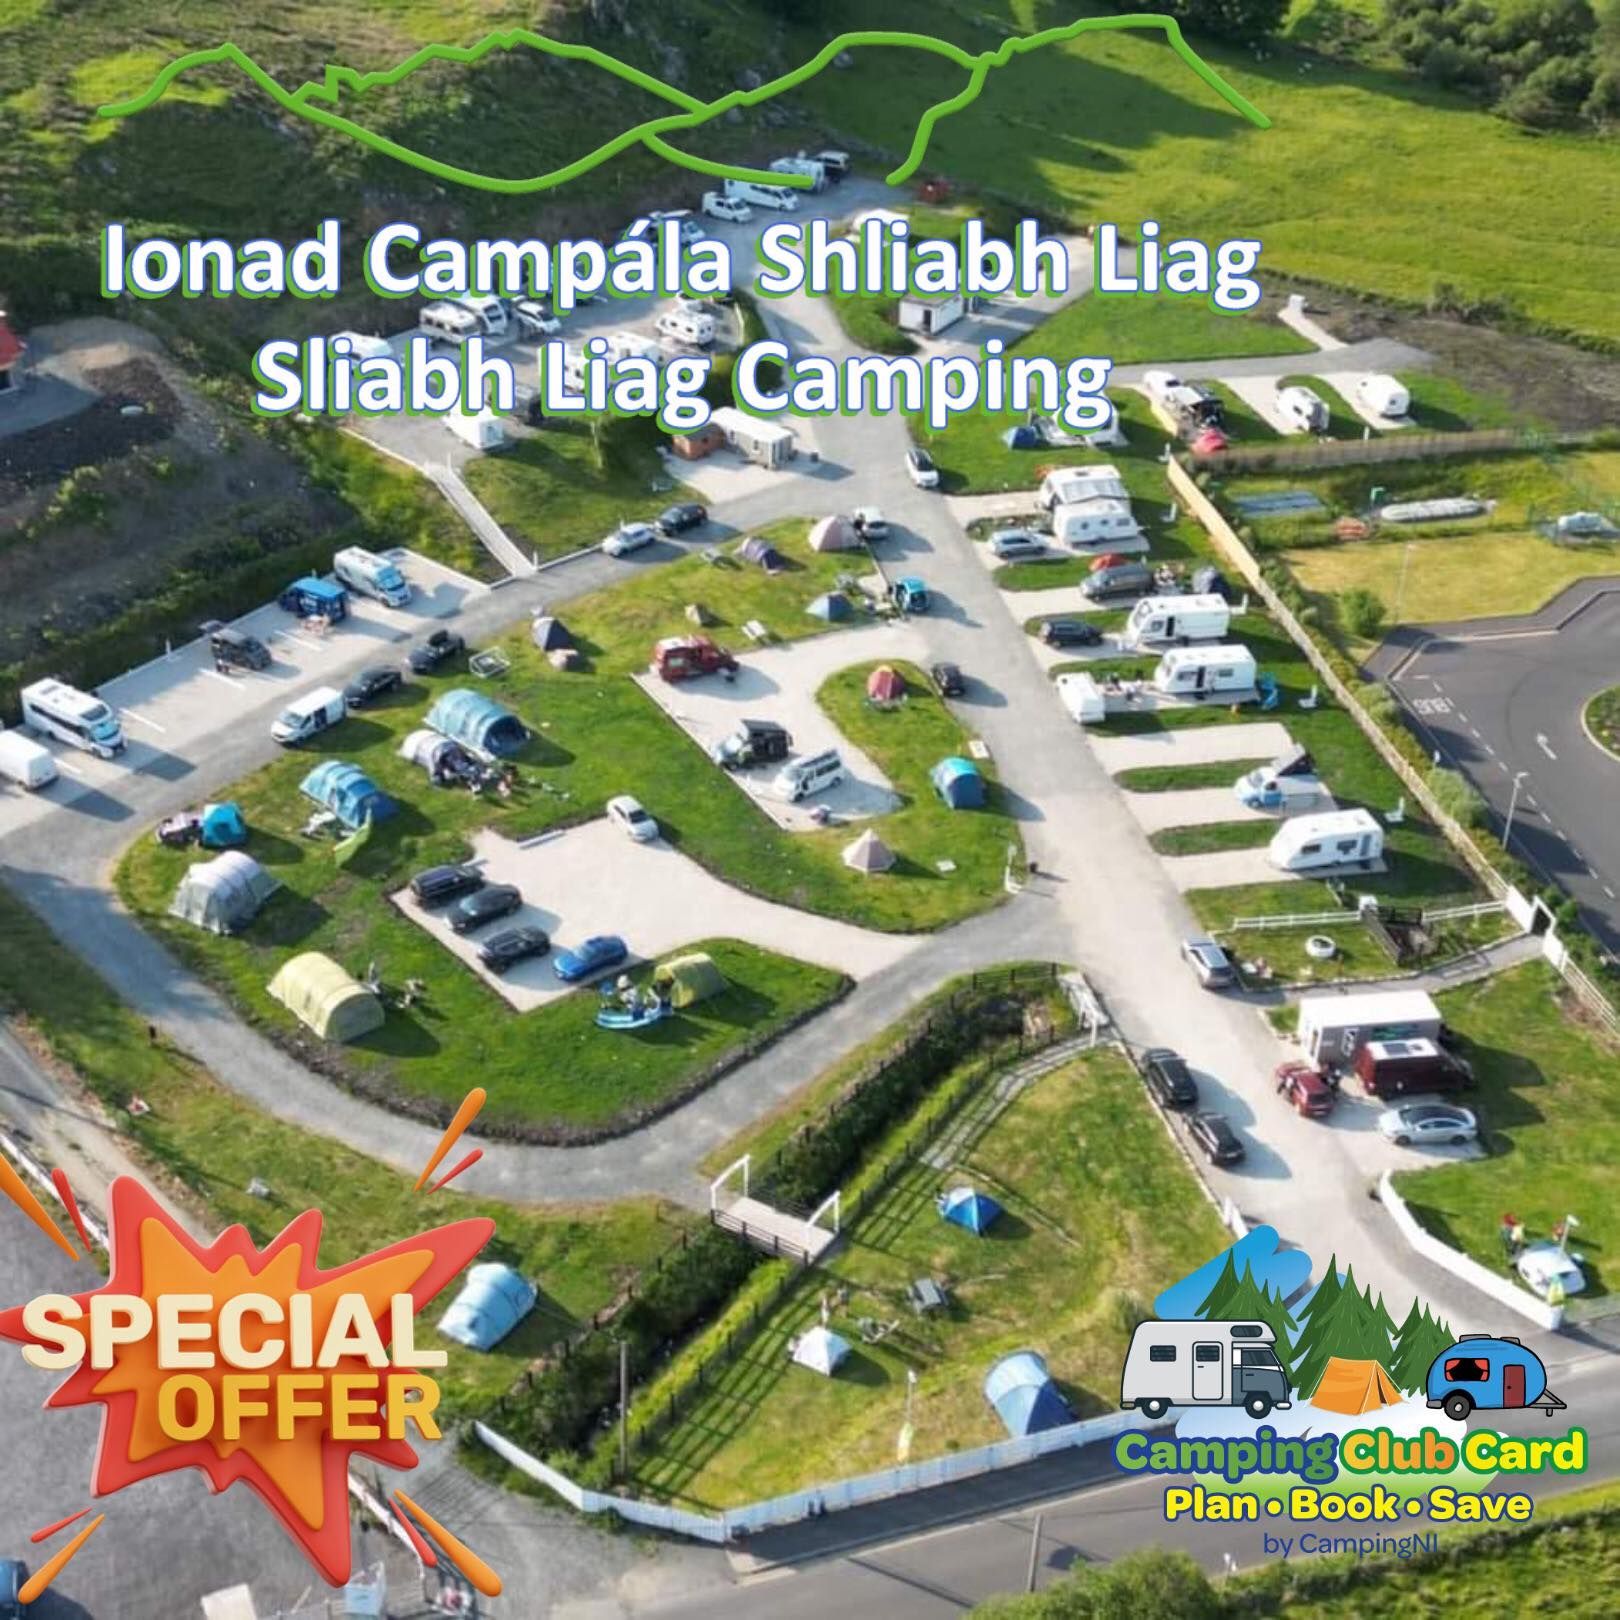 Sliabh Liag Camping Camping Club Card by CampingNI members discount